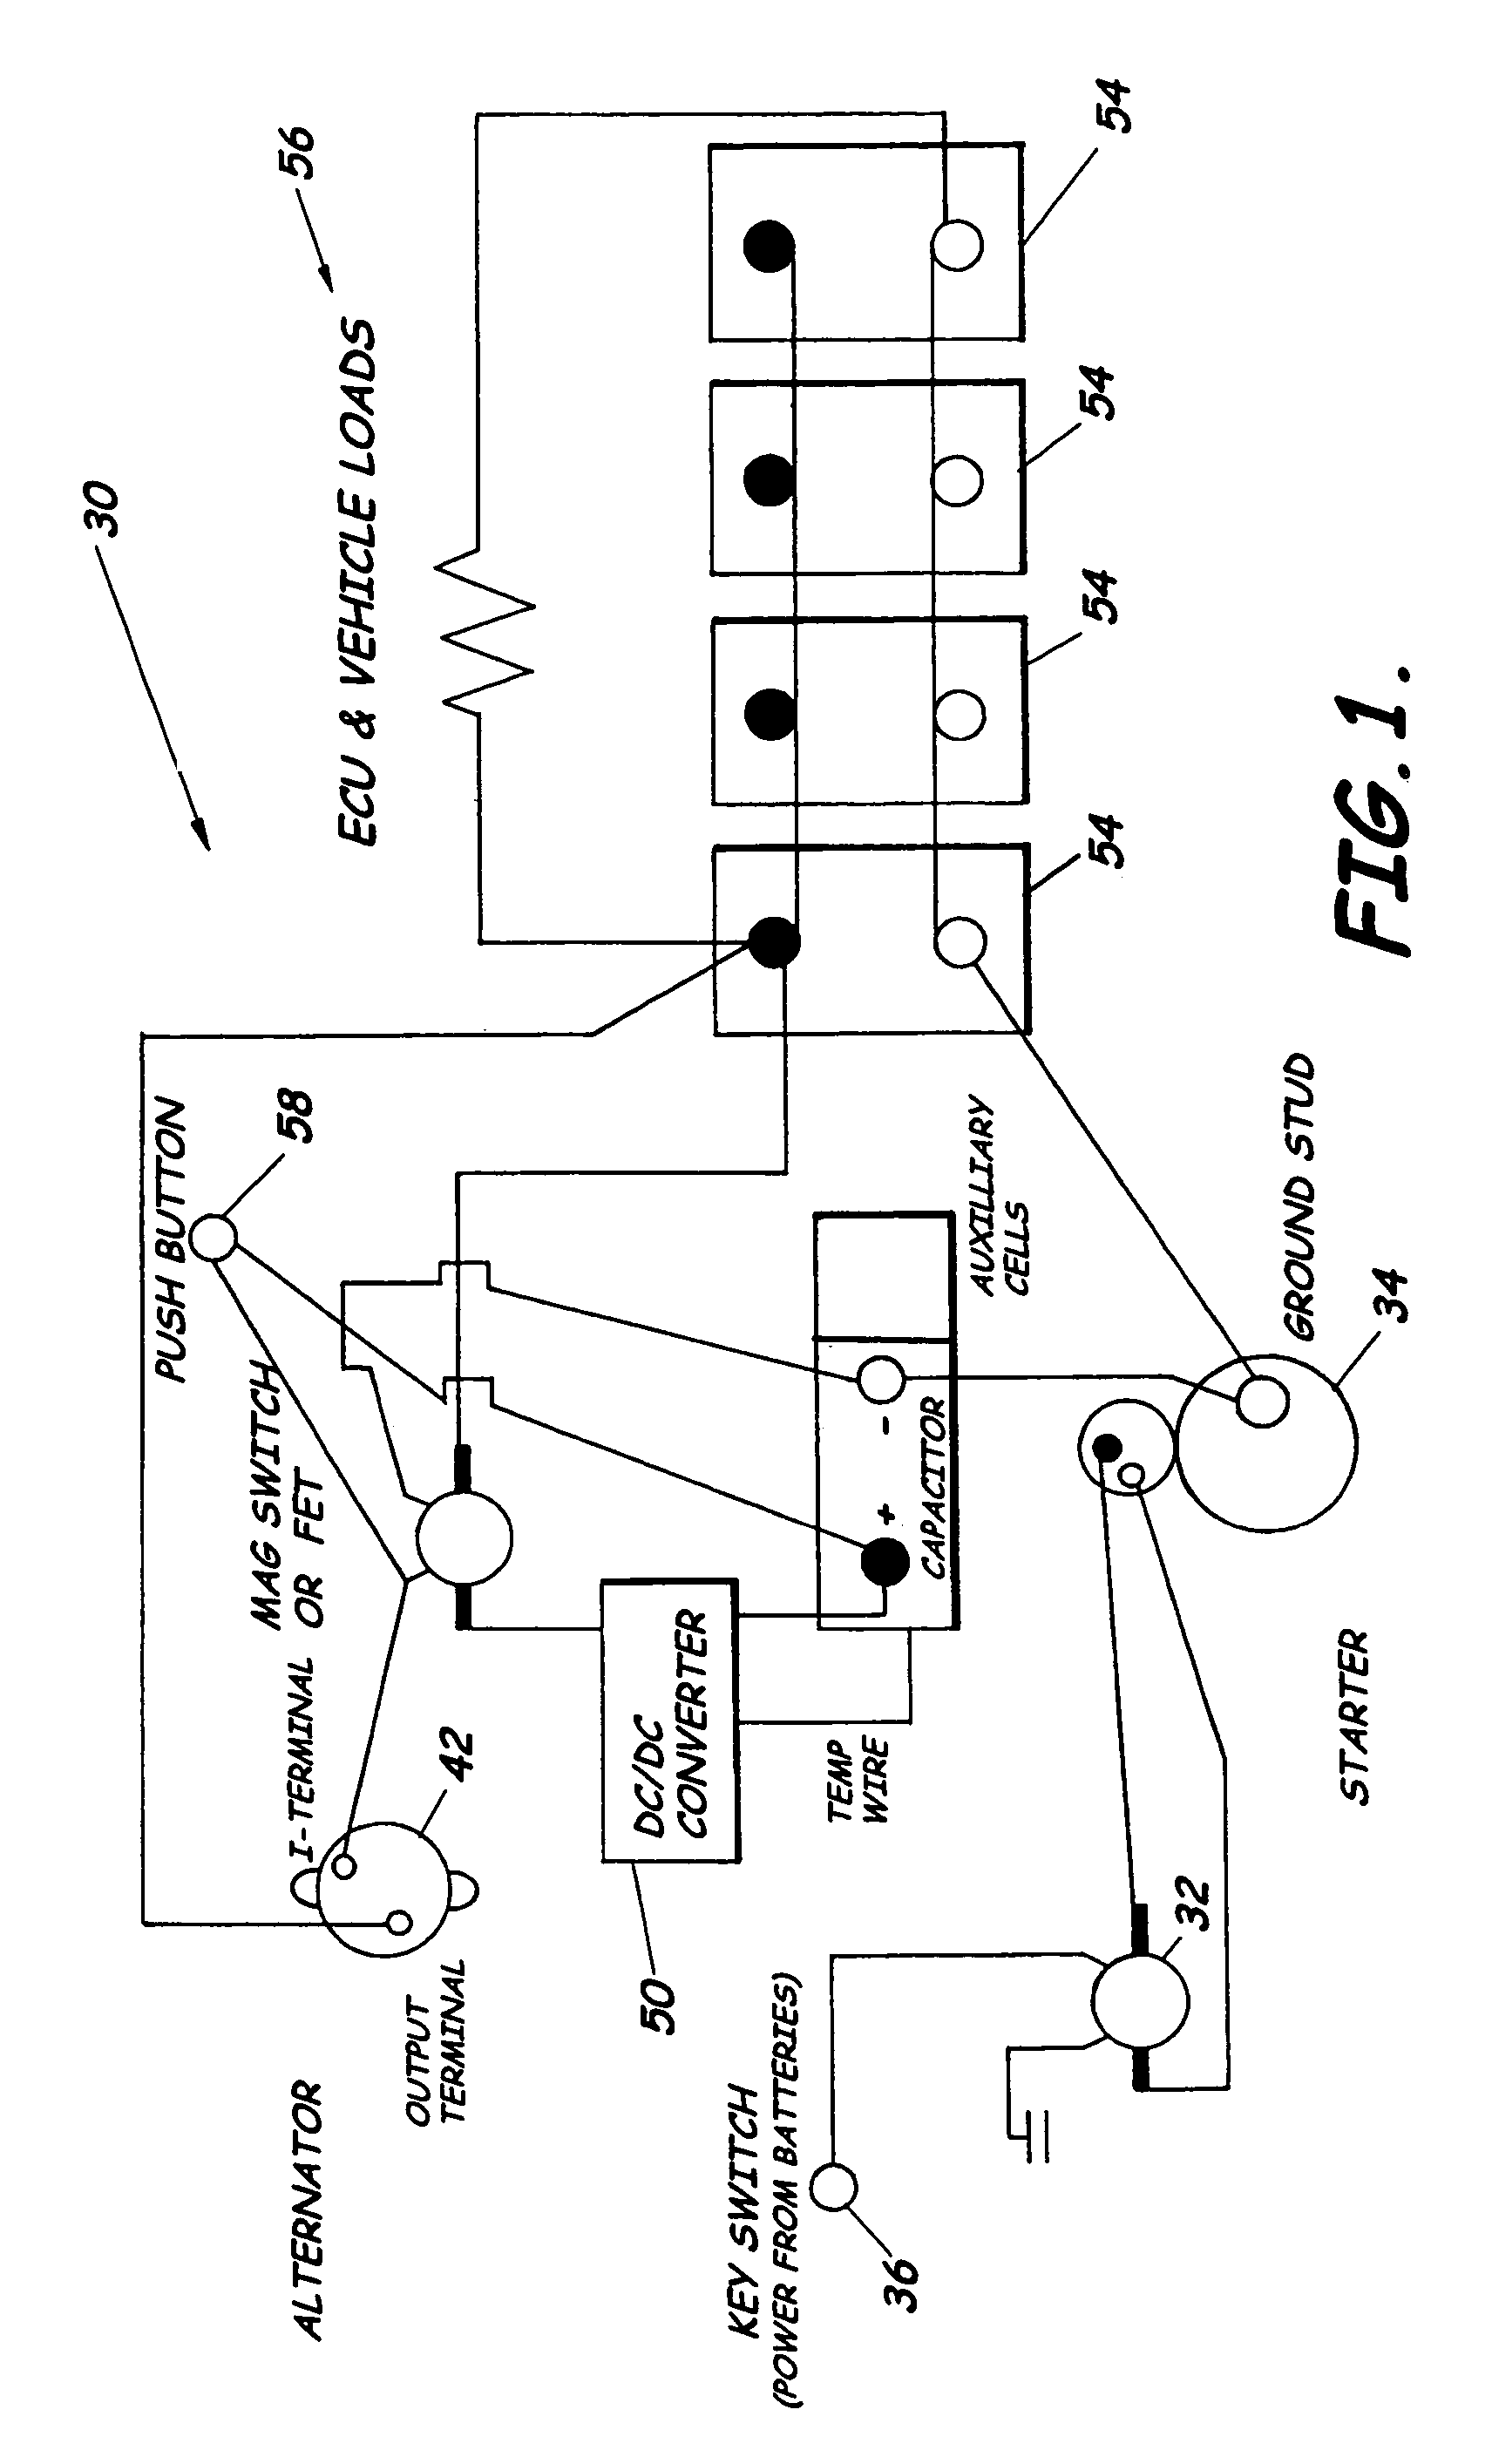 Capacitor-based powering system and associated methods